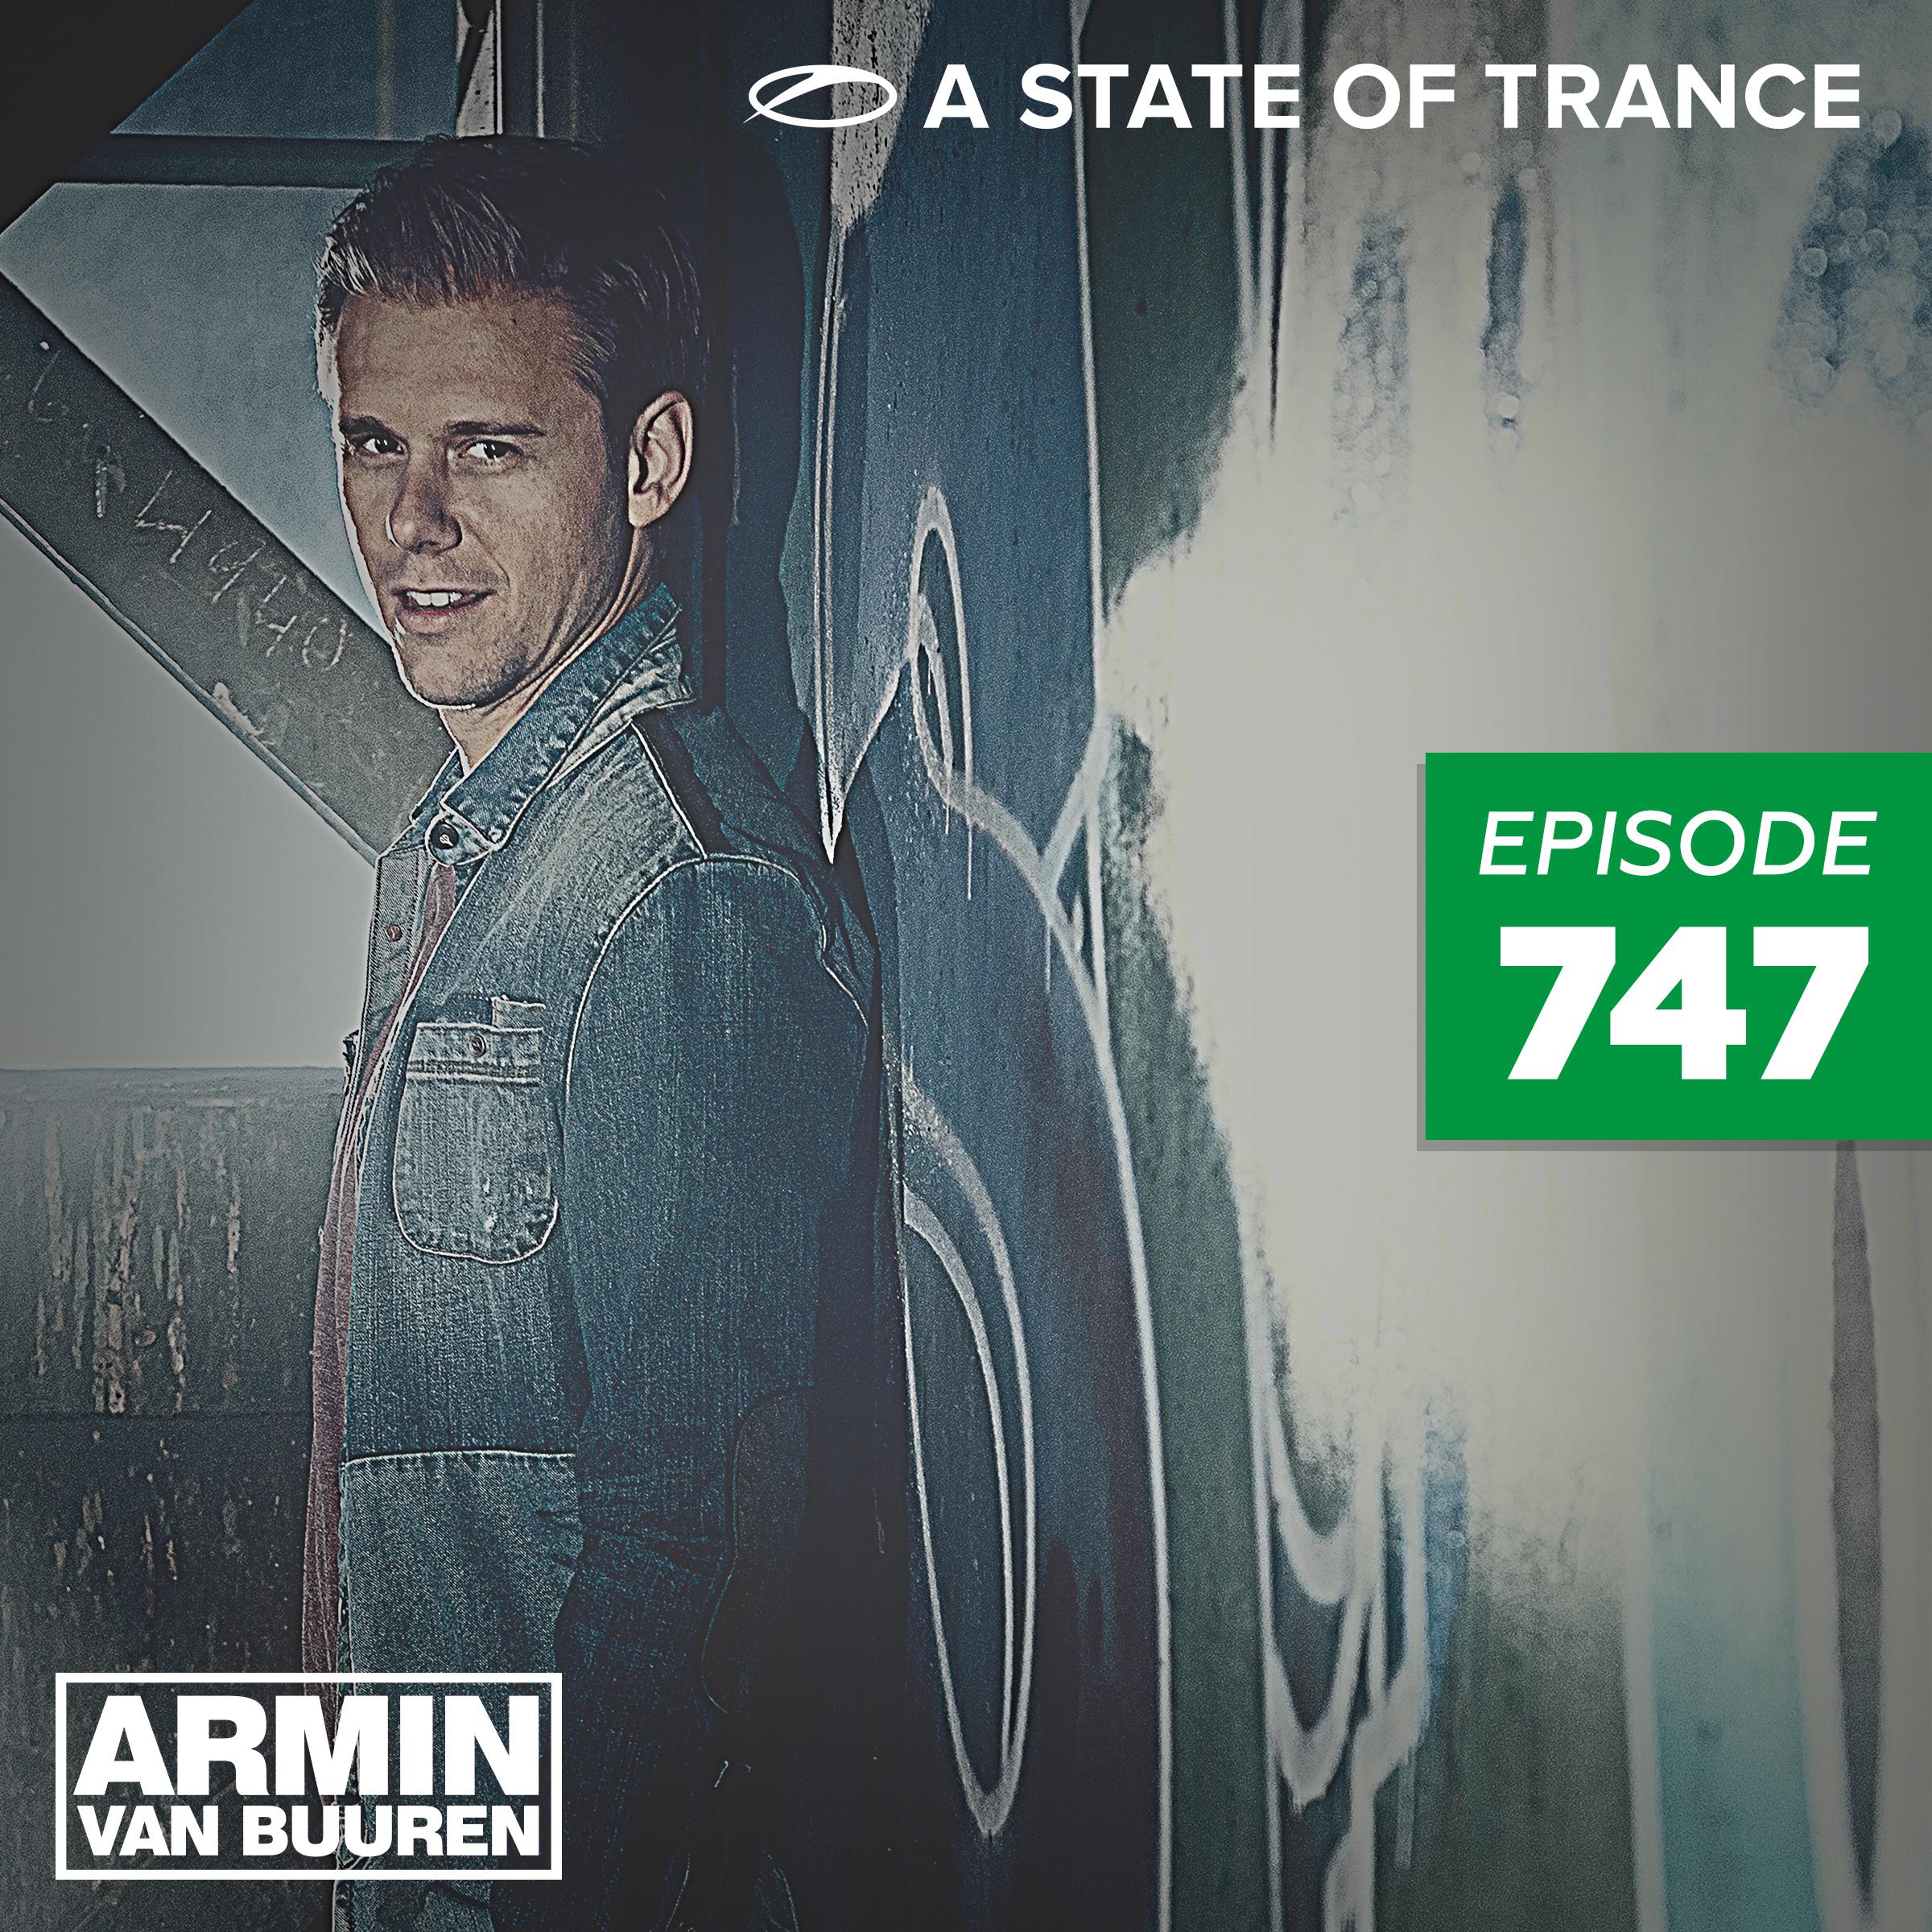 Andrew Bayer - Nobody Told Me (ASOT 747)